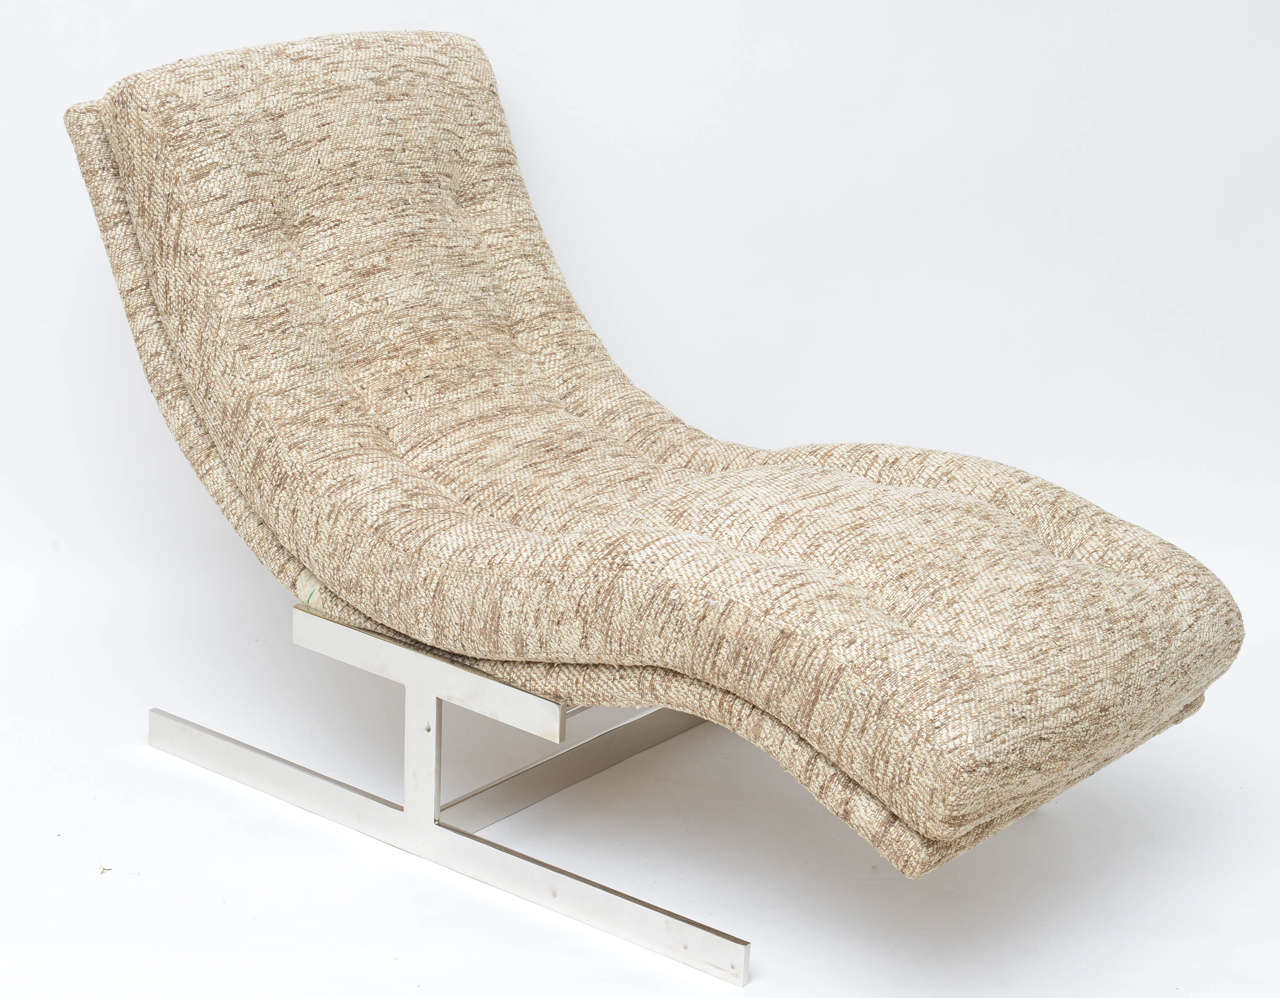 Milo Baughman's classic Wave lounge with chromed steel base. Sumptuously upholstered in thick, richly textured raw silk.